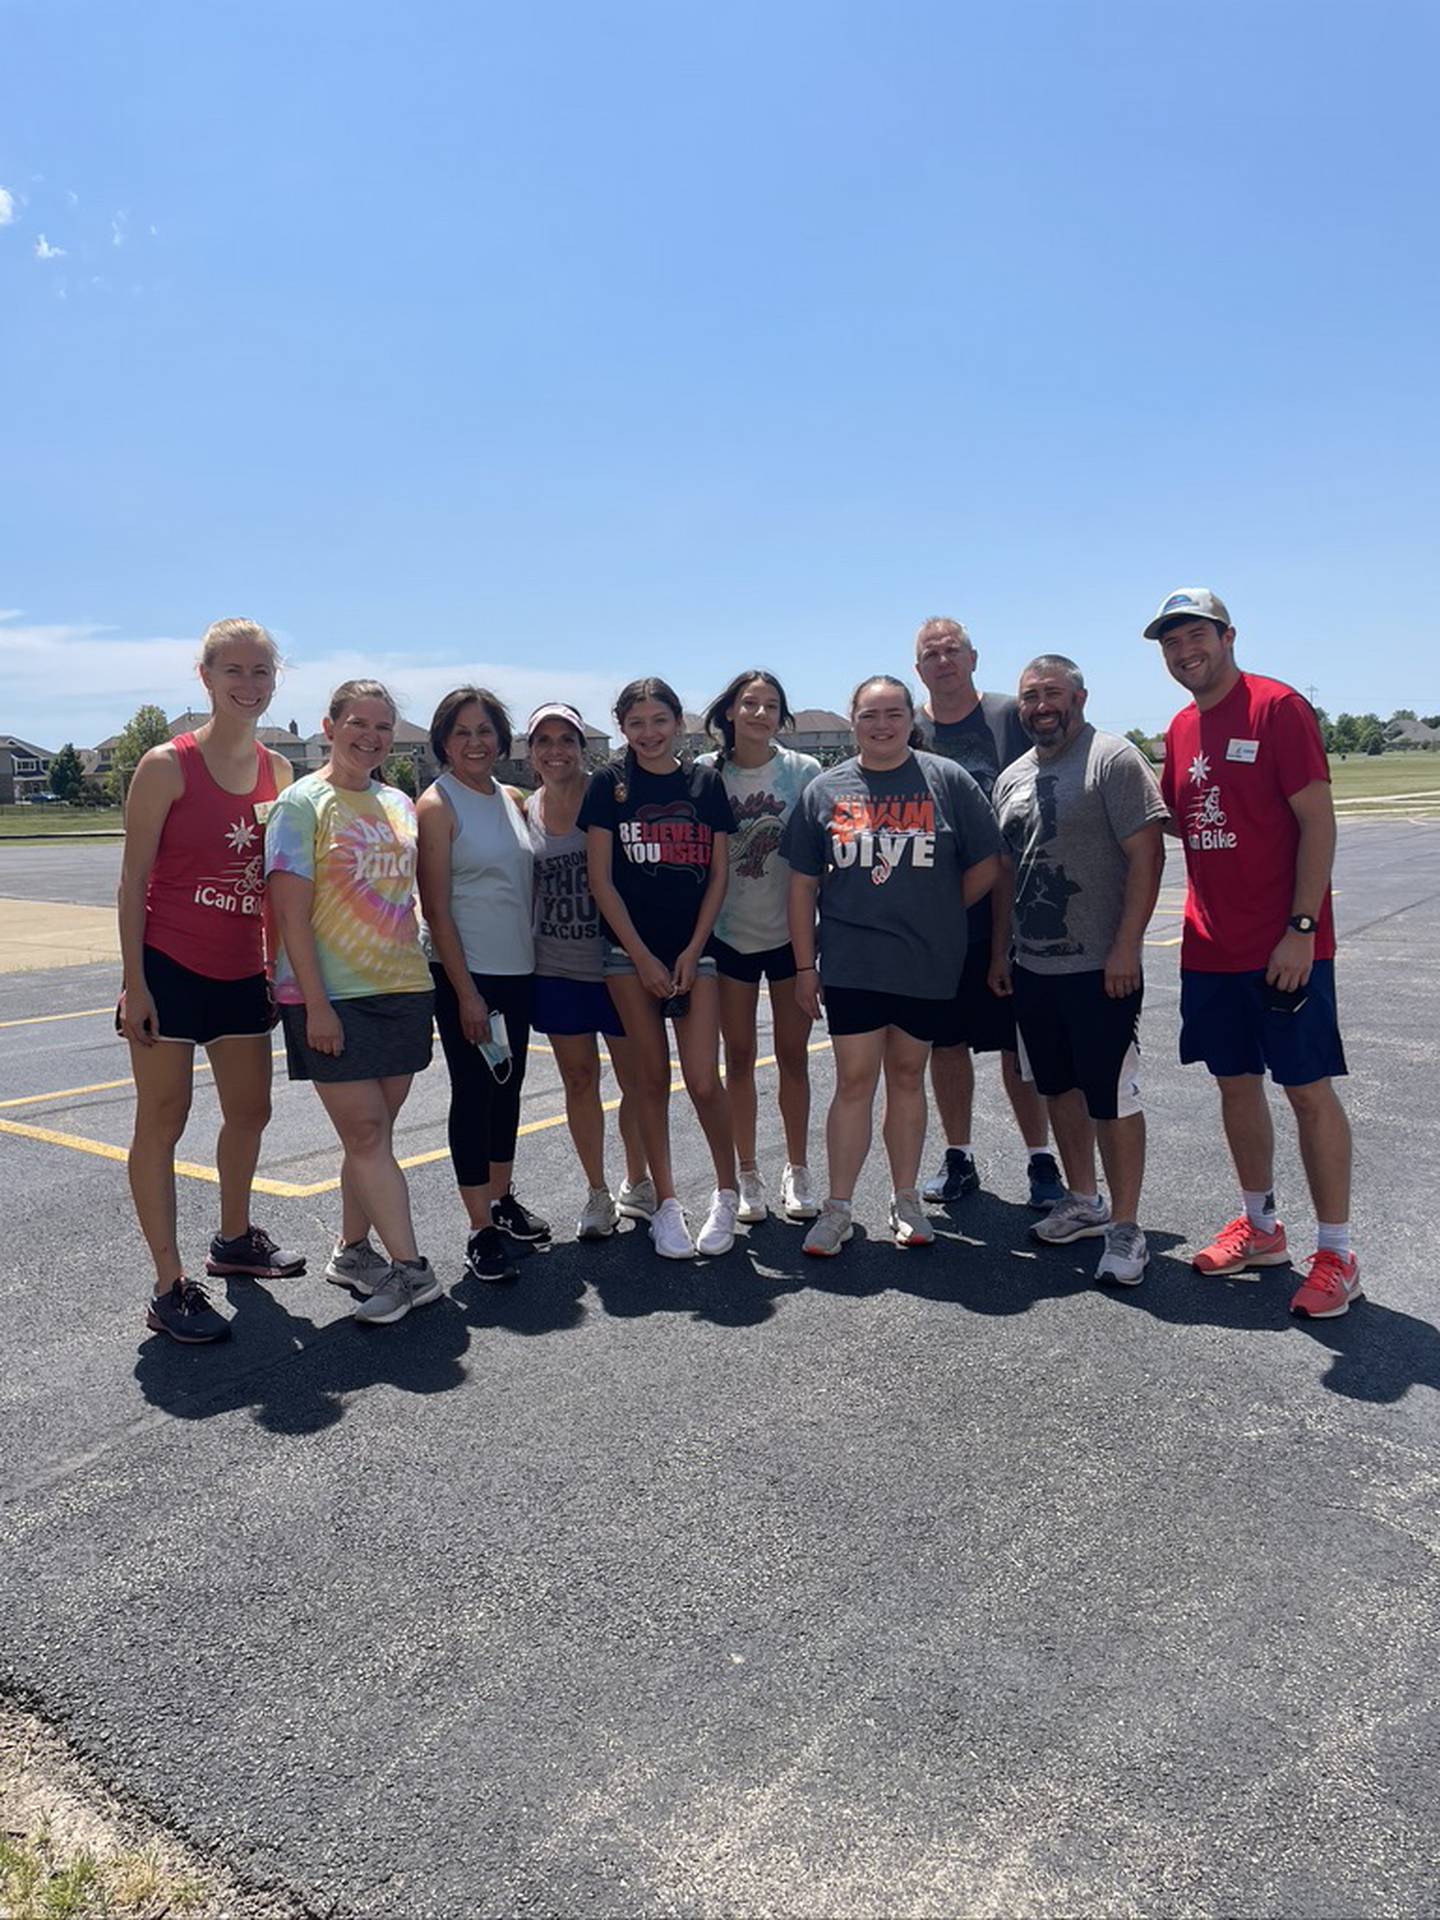 Pictured are Kaitlyn Schmidt from iCan Shine, volunteer Megan Horsch, volunteer Monica Marquez Nelson, volunteer Julie Belka, volunteer Valentina Lagunas, volunteer Audrey Belka, volunteer Mackenzie Rokoczy, volunteer Mike Rokoczy, Supervisor Fred Manzi, and Connor Maguder from iCan Shine at the 
The iCan Bike program. This program teaches people with disabilities ages 8 and up to ride a conventional two-wheel bike. It was held June 14 to June 18, 2021, at Spencer Crossing School in New Lenox.